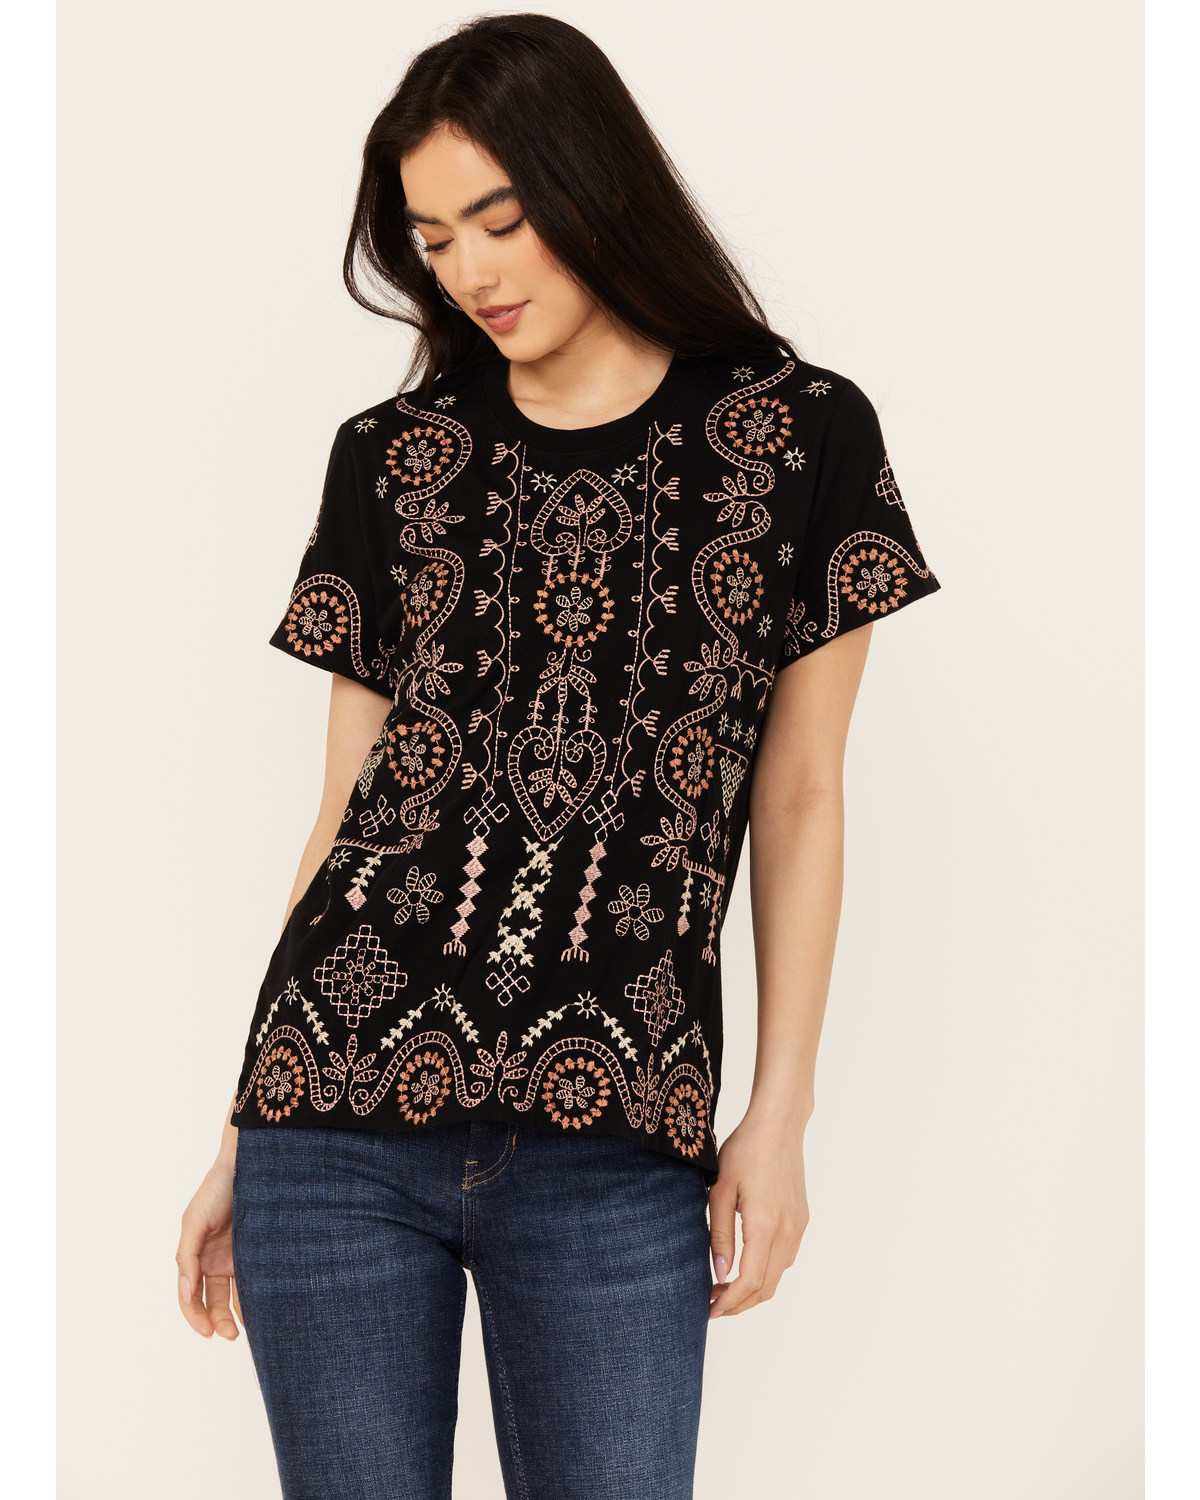 Johnny Was Women's Geo Print Embroidered Short Sleeve Tee